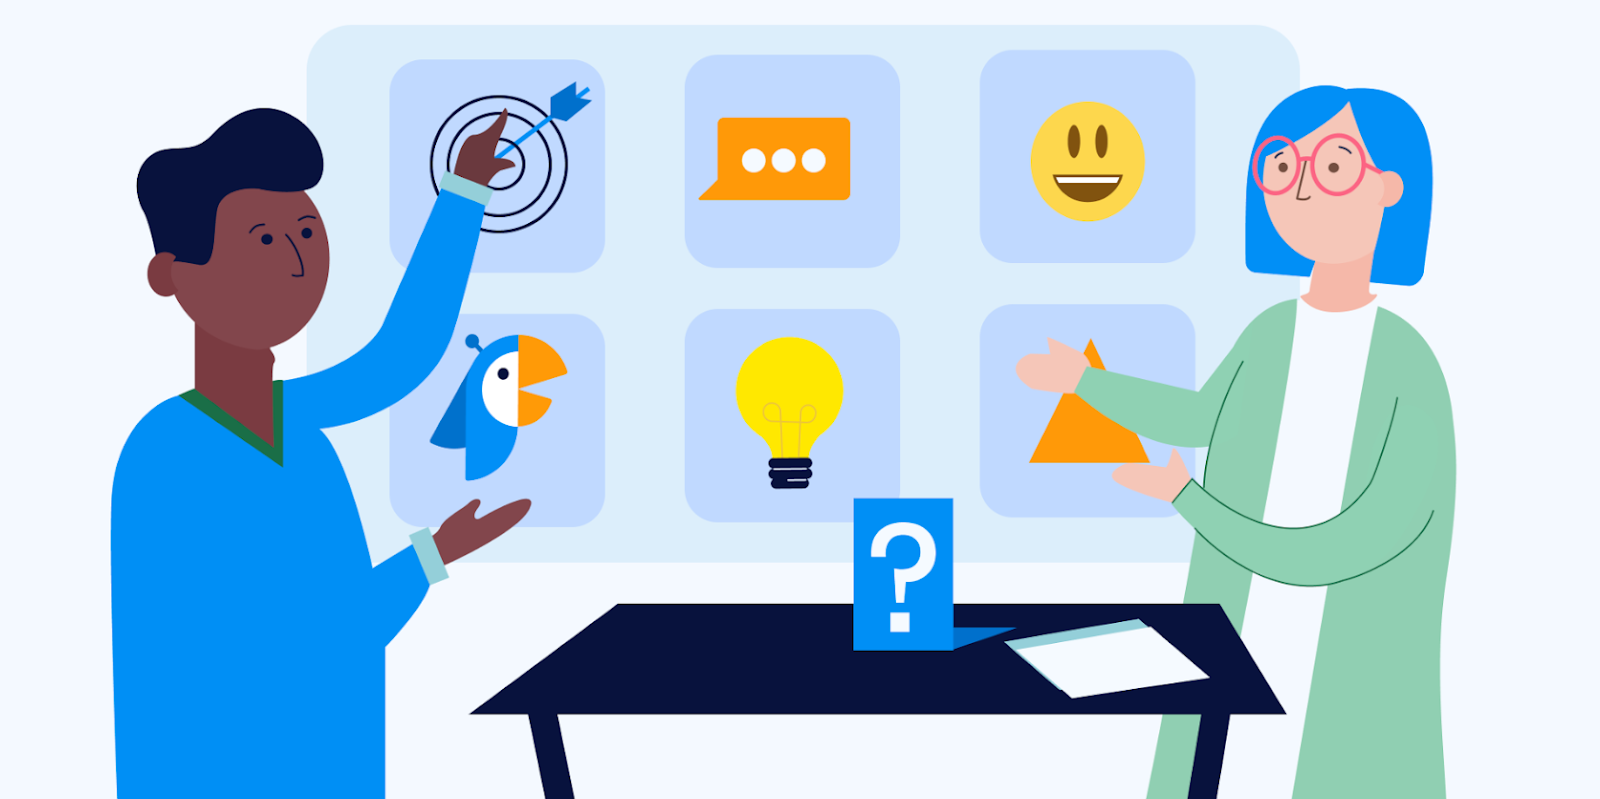 Culture of feedback: employees pointing at icons